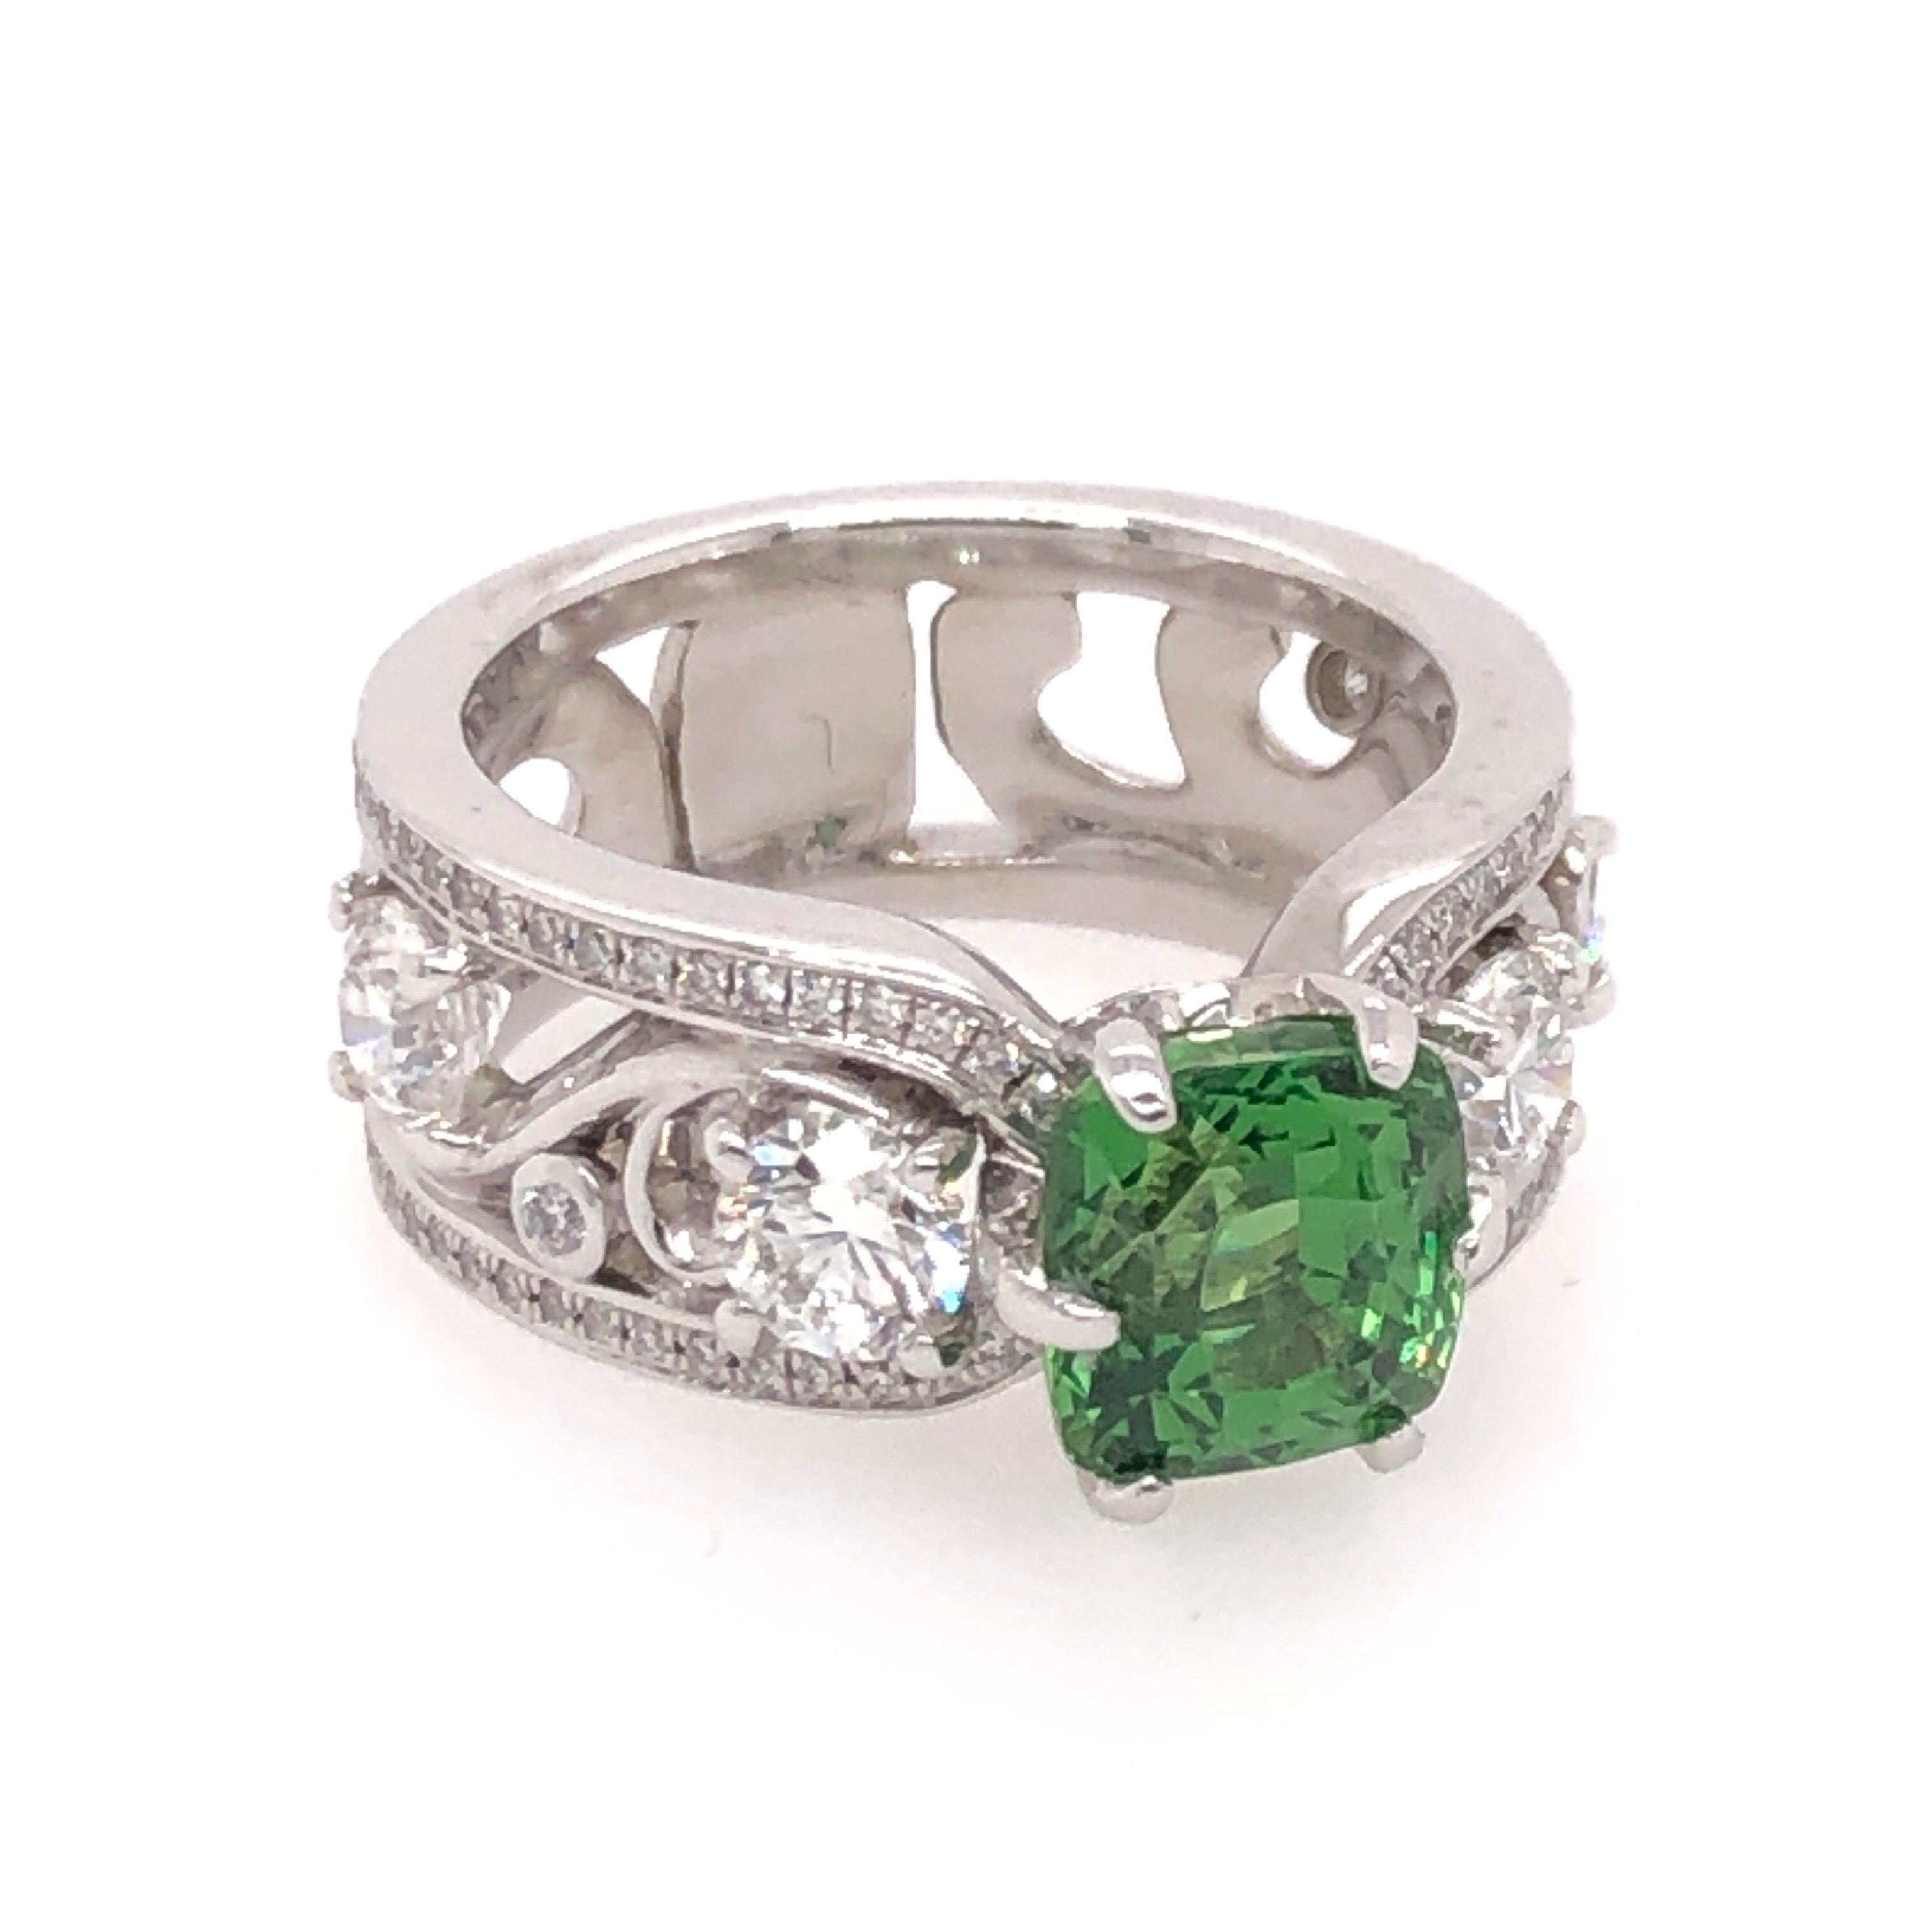 This radiant cushion cut 2.52CT green tsavorite crowns its floral motif 18K white gold setting. A total of 1.65 CTS of round cut diamonds brighten the ring with the right amount of sparkle to accent the freshness of the green tsavorite.  

Size: 5
